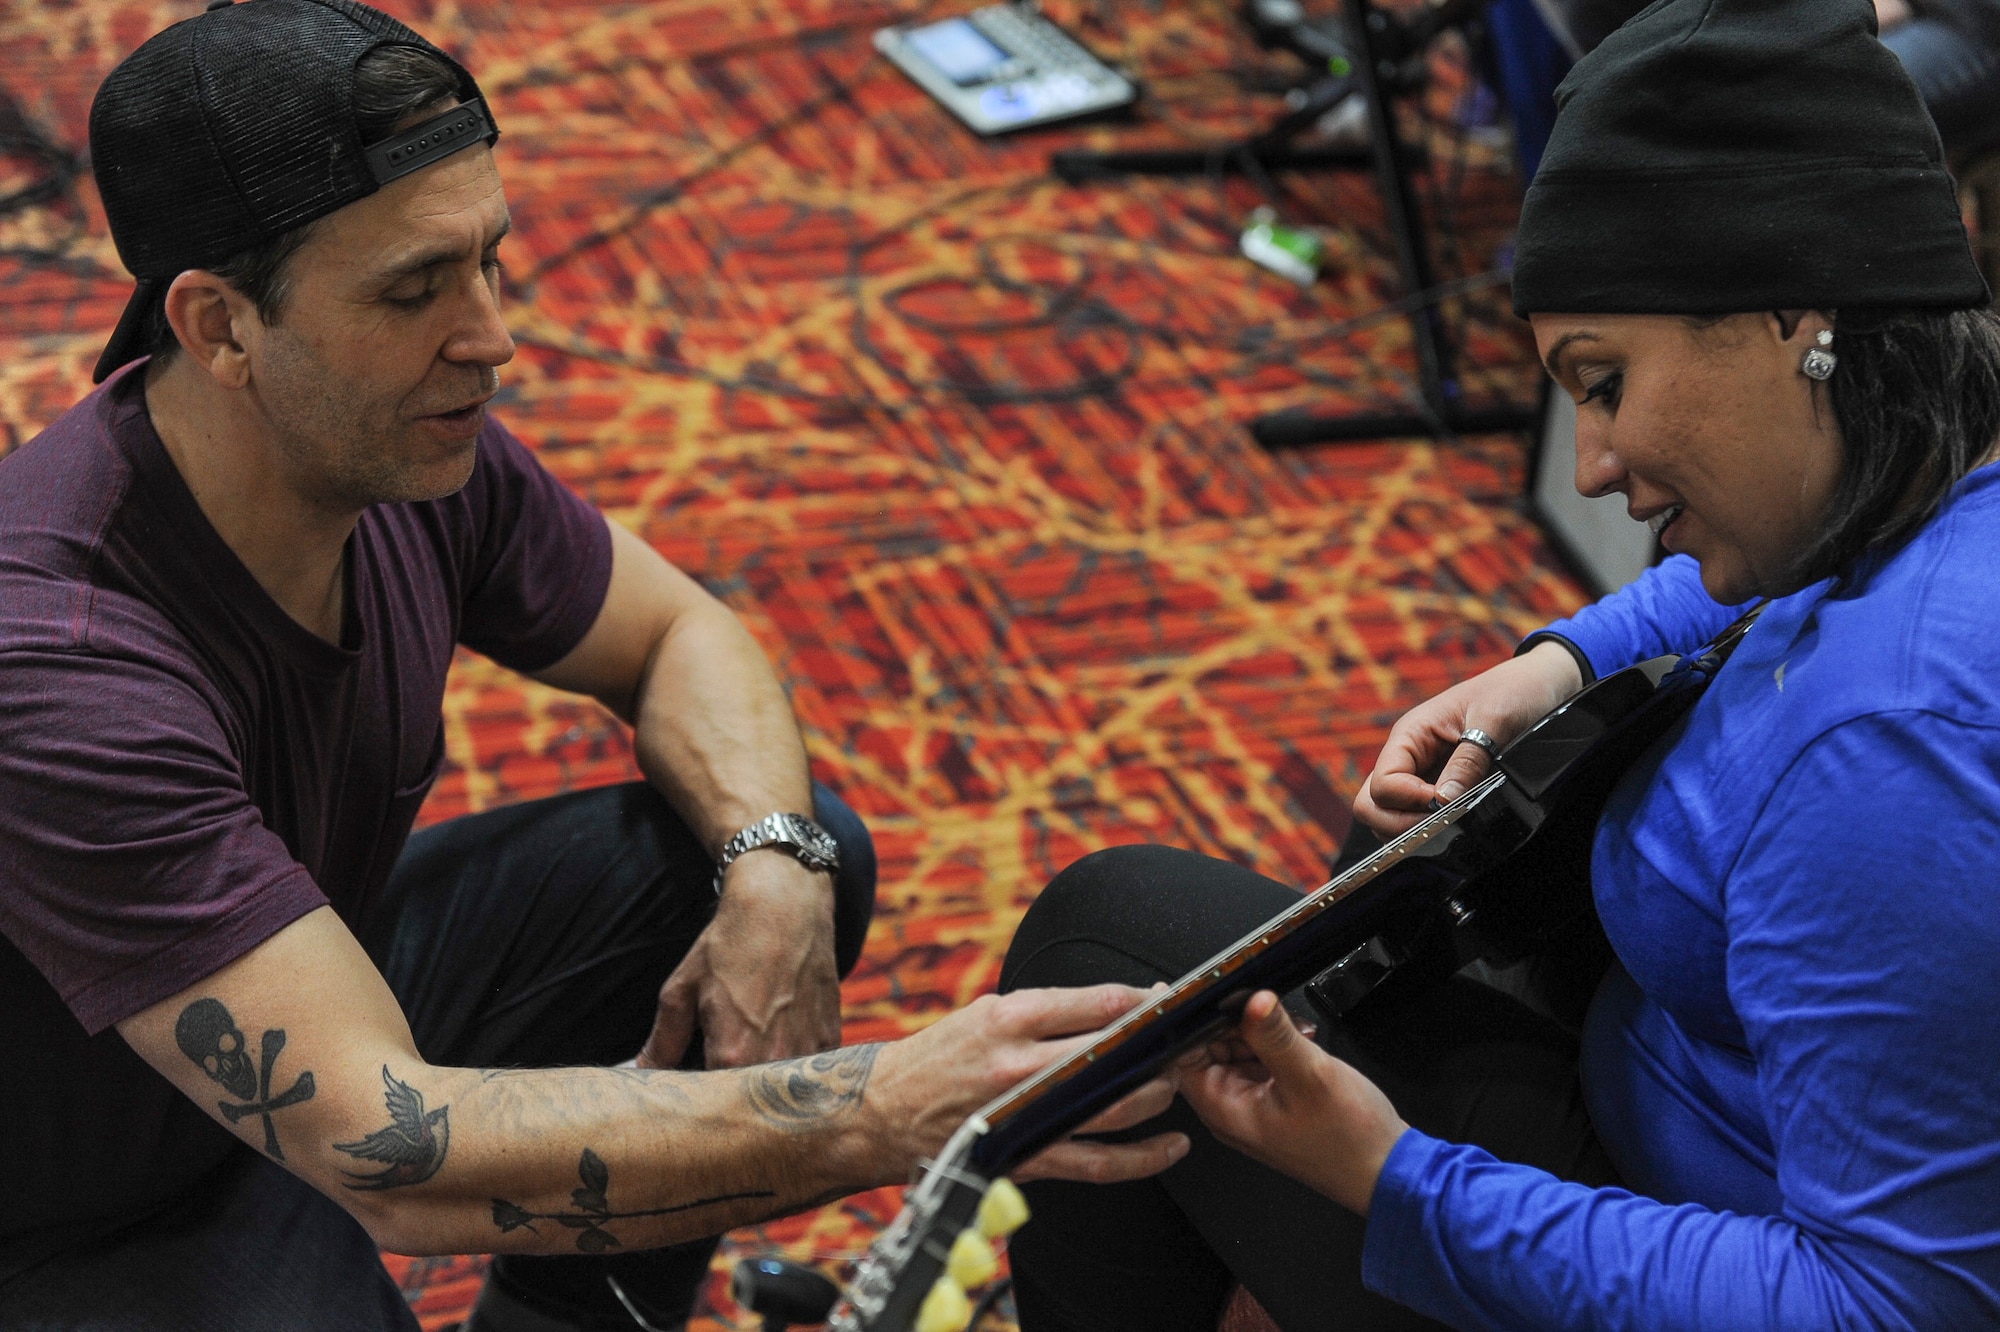 Former Korn guitarist and Rock to Recovery founder Wes Geer gives pointers to an Air Force Wounded Warrior Trials participant during a Rock to Recovery practice session in Las Vegas, March 1, 2015. Rock to Recovery brings together people suffering from similar ailments and each participant shares their personal story before choosing from a variety of instruments to play as part of a band. (U.S. Air Force photo by Staff Sgt. Siuta B. Ika)